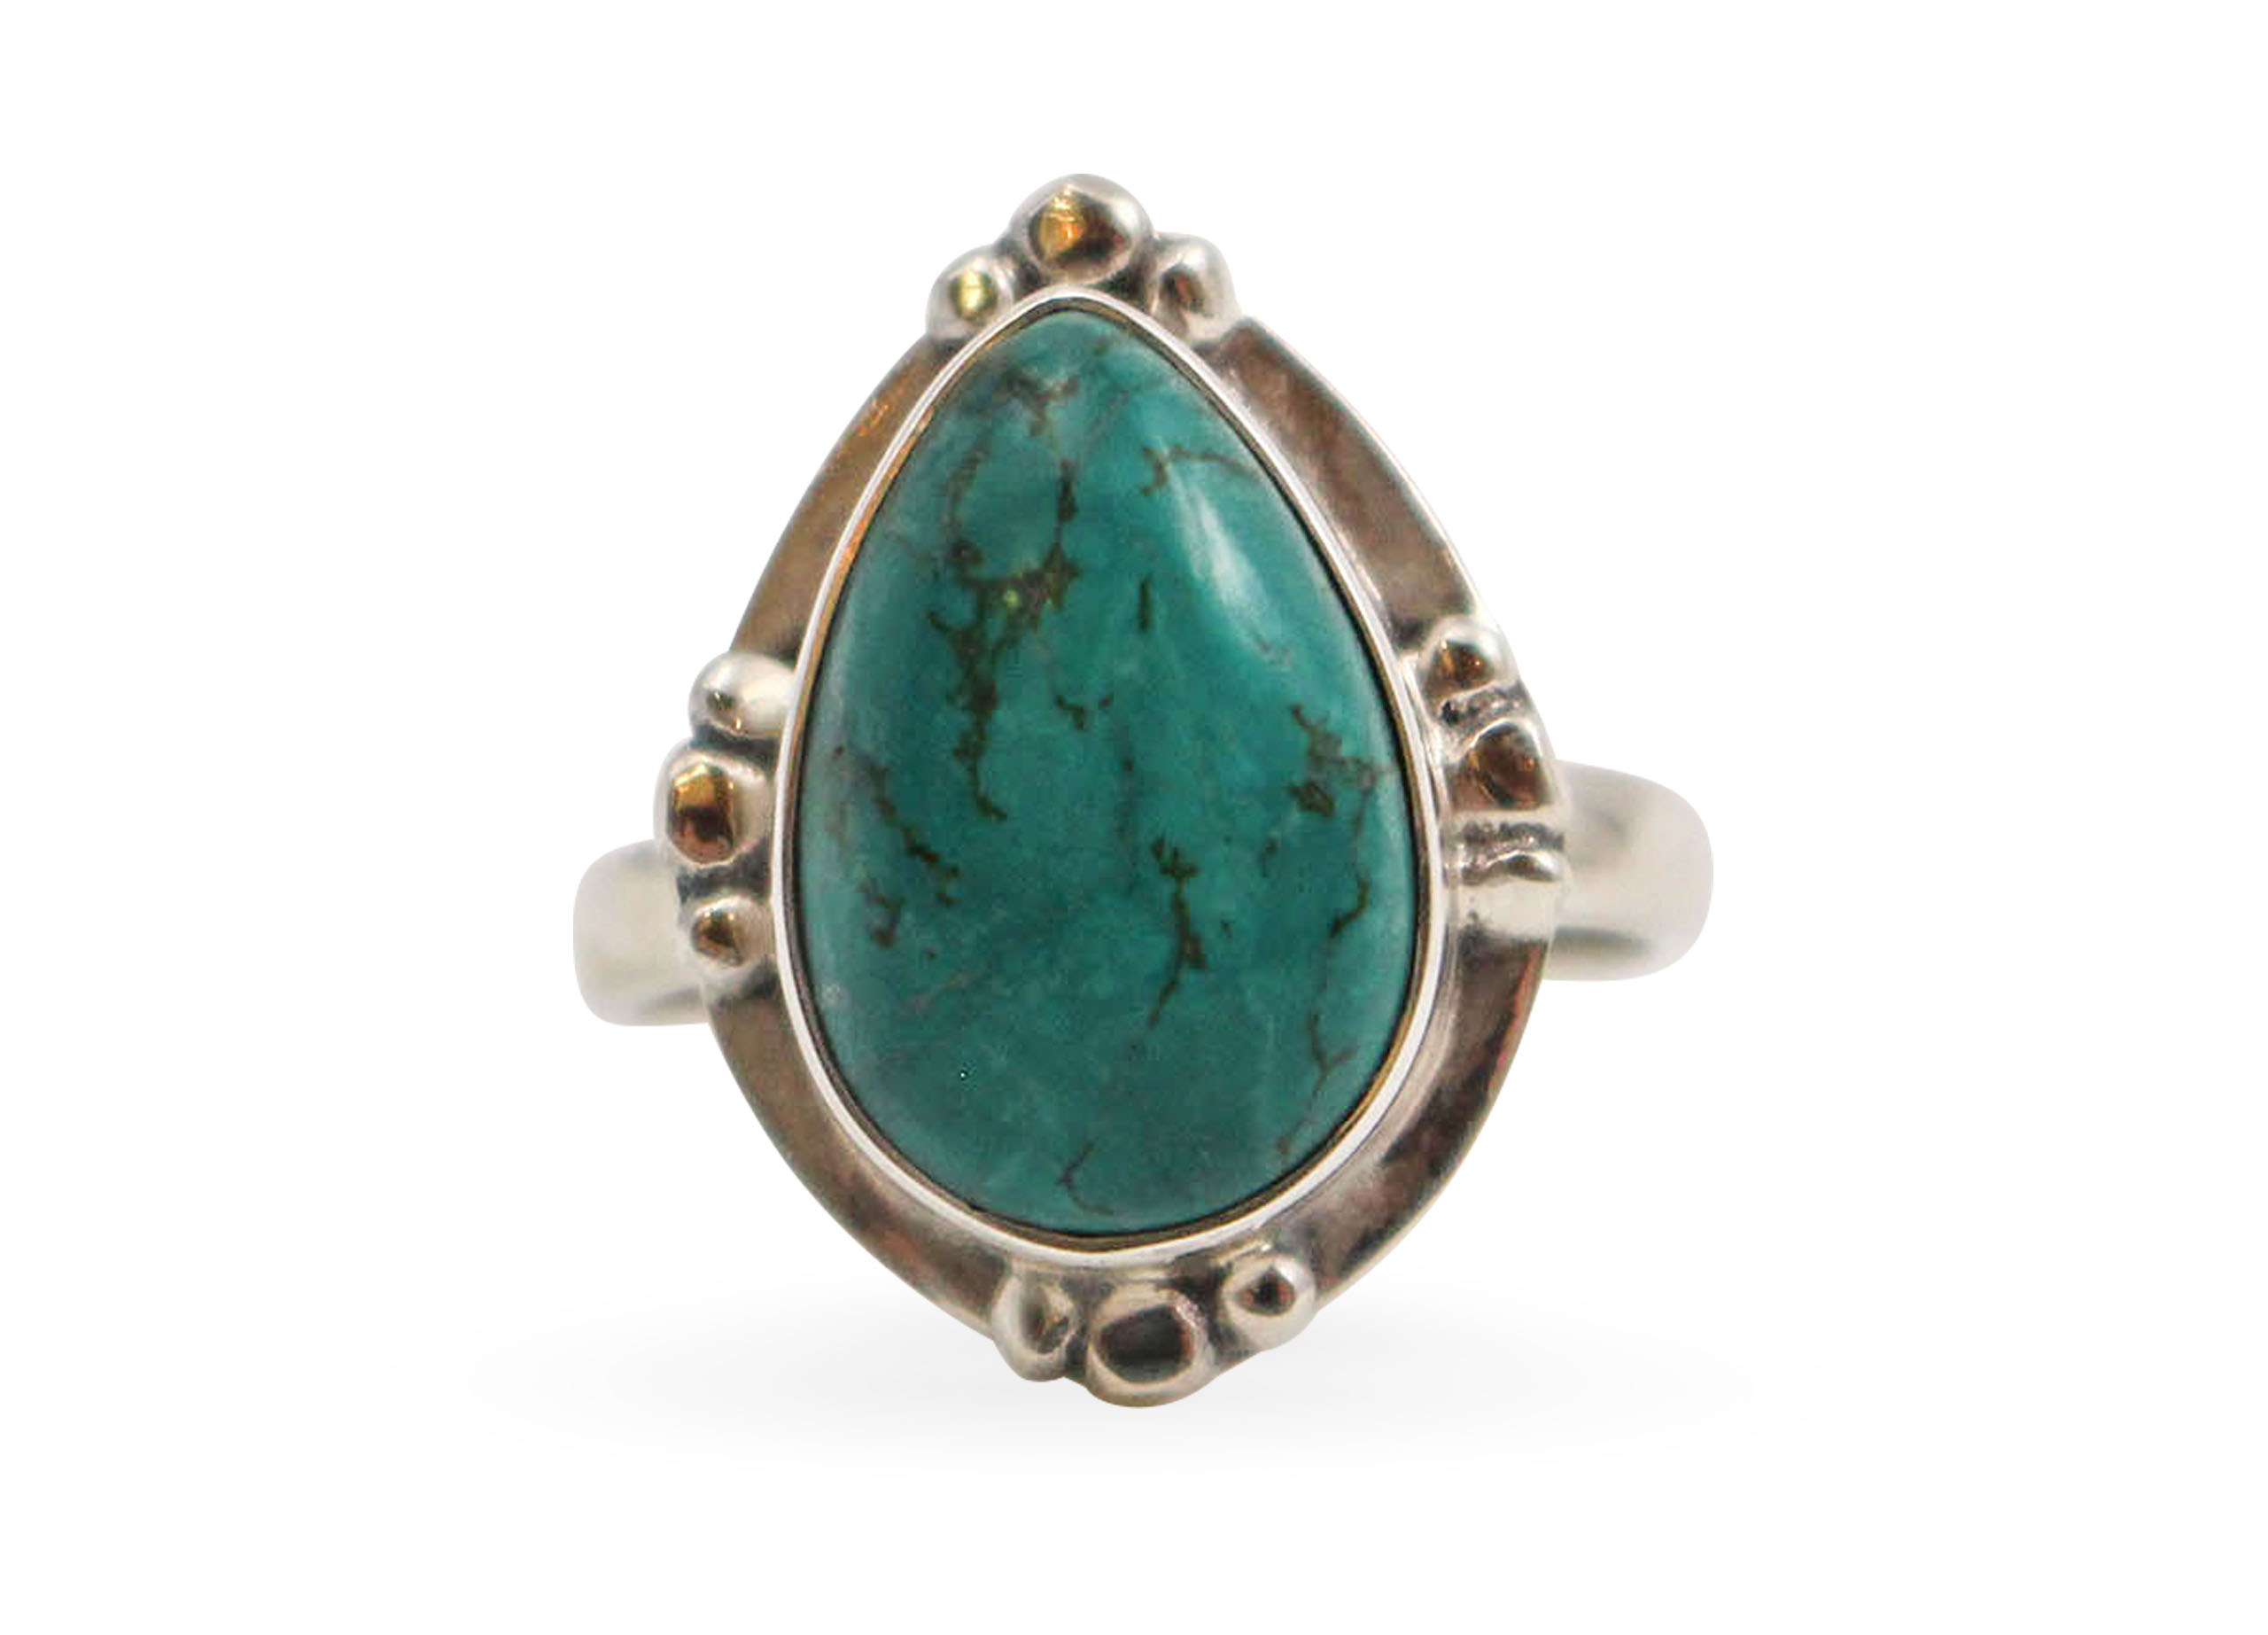 Turquoise "Freeform" sterling silver ring - Crystal Dreams